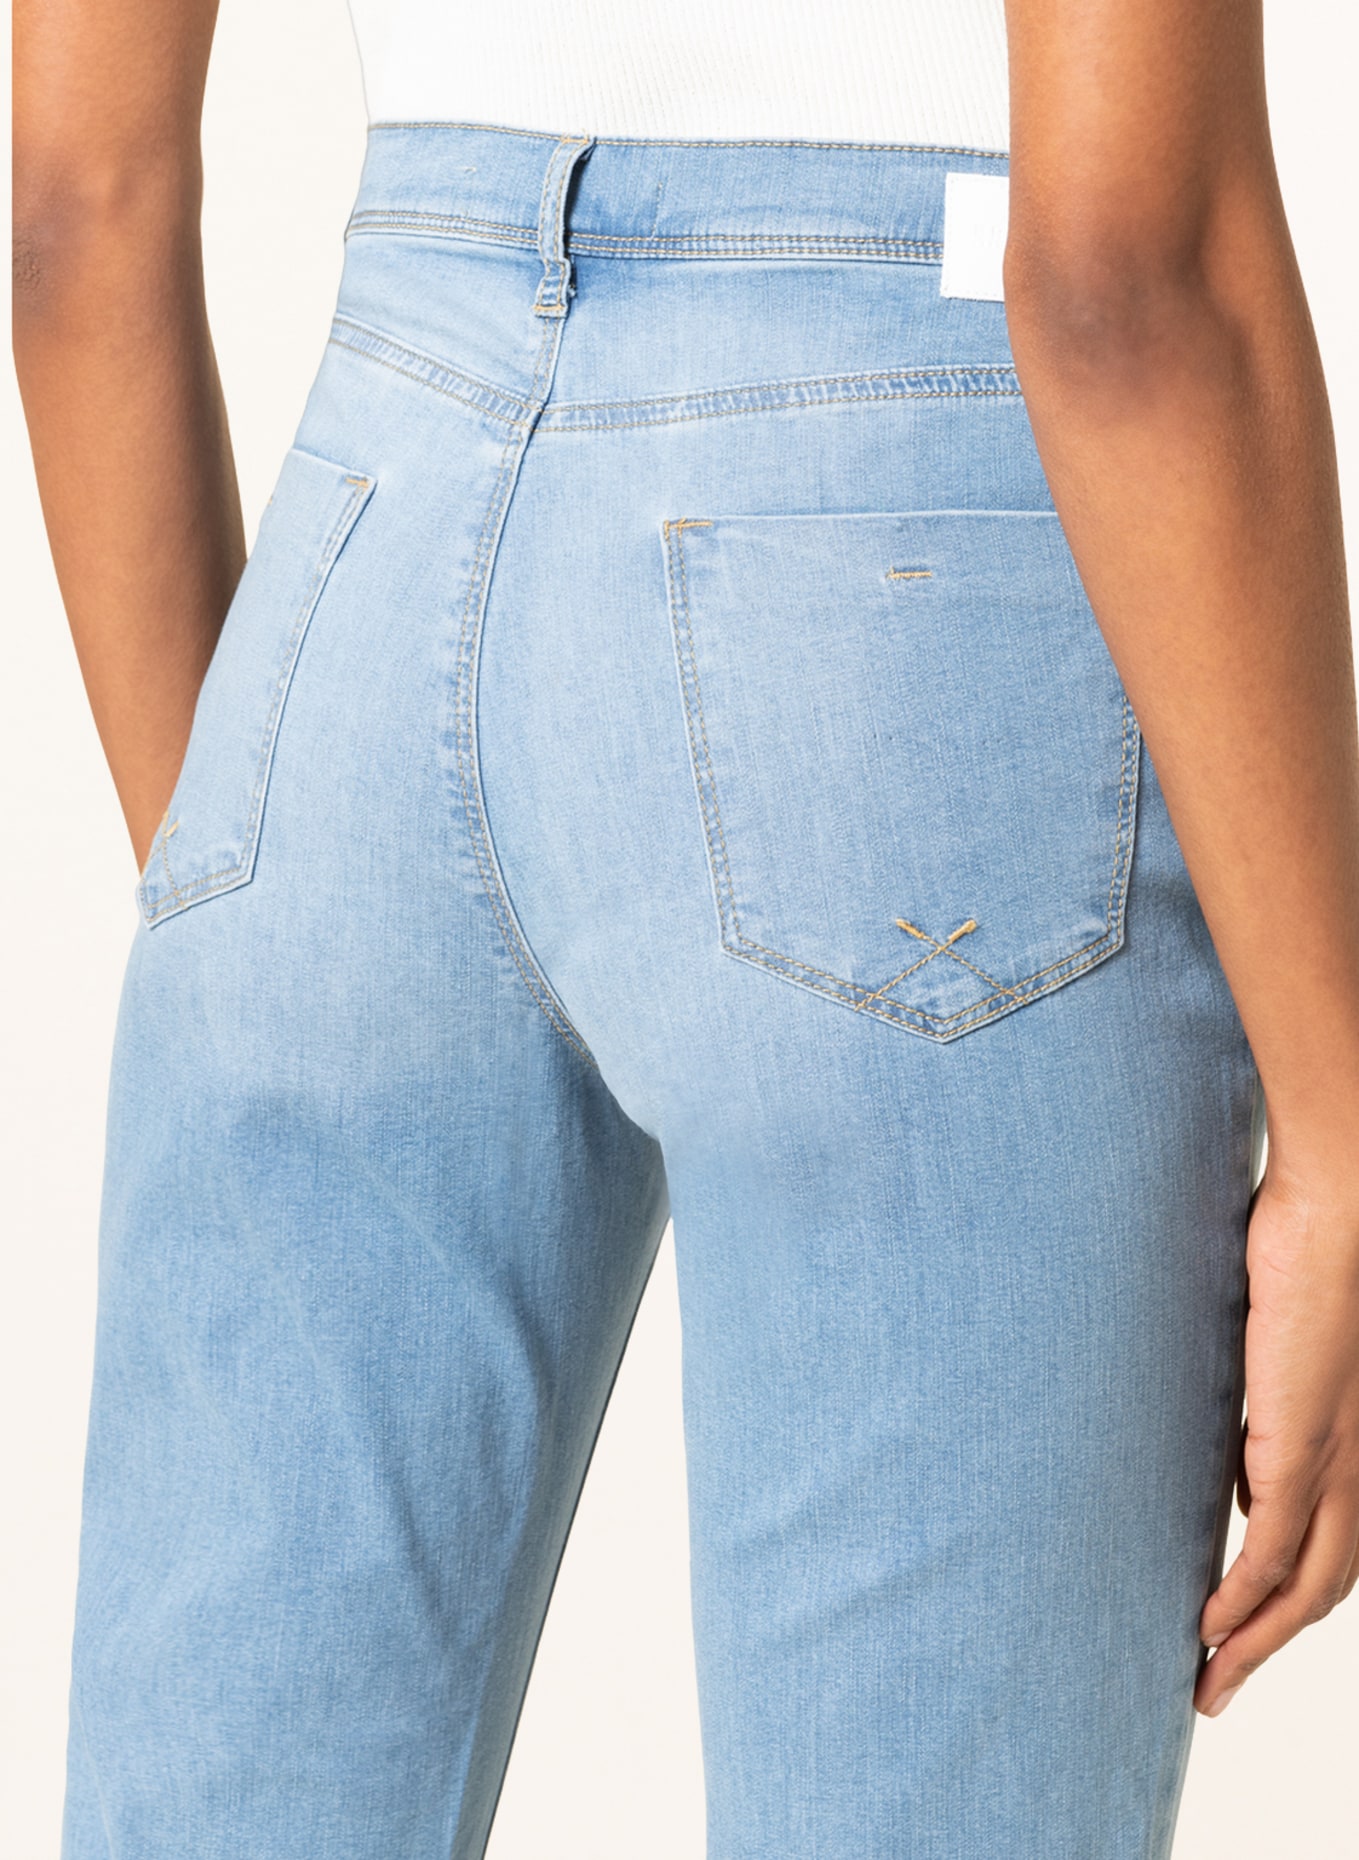 BRAX Jeans MARY in 19 used light blue